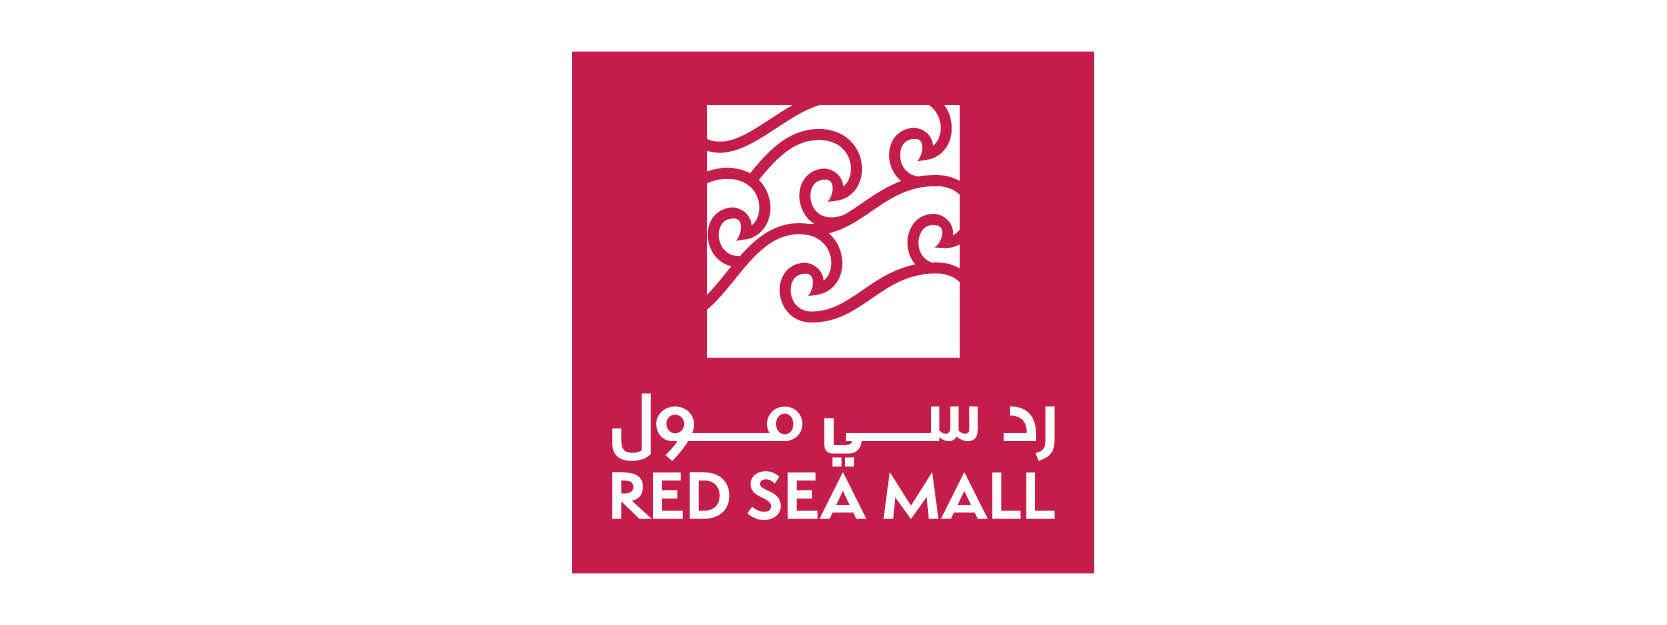 Red sea Mall